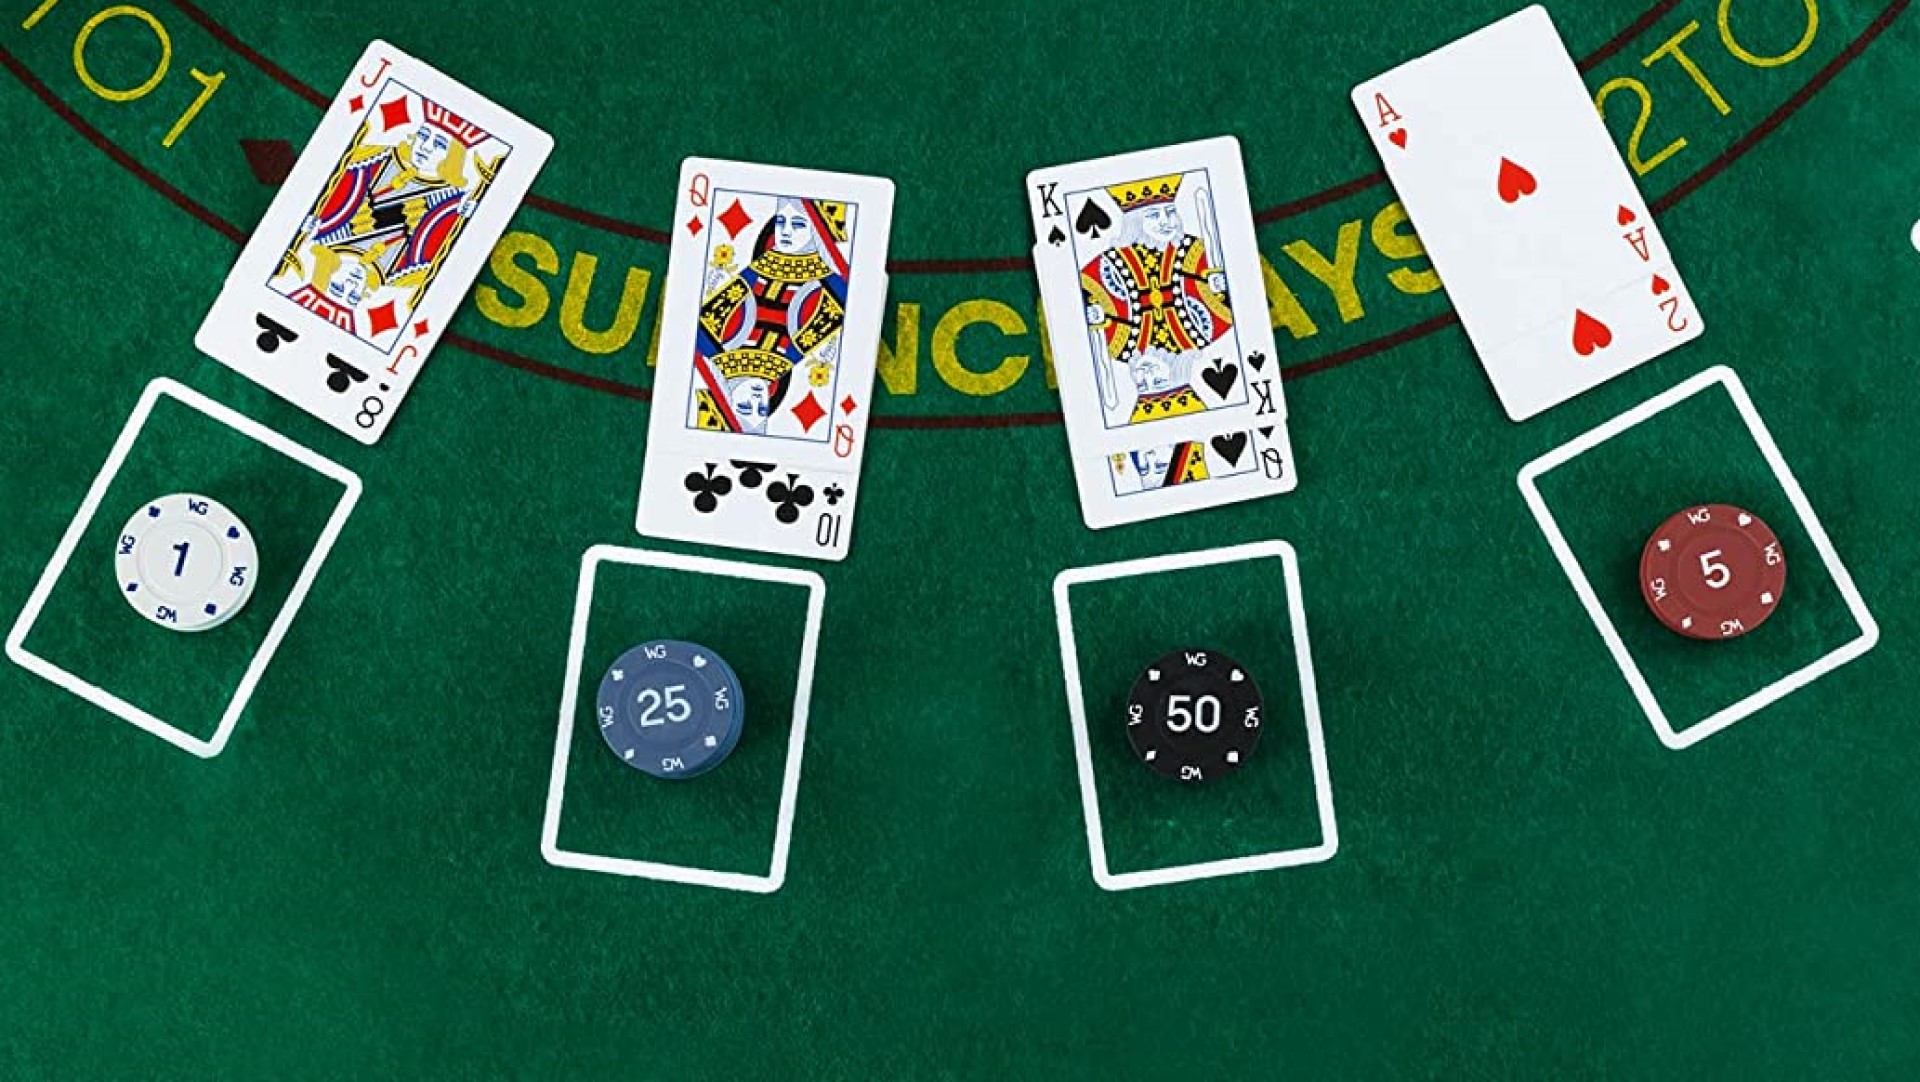 Blackjack rules  Learn how to play at